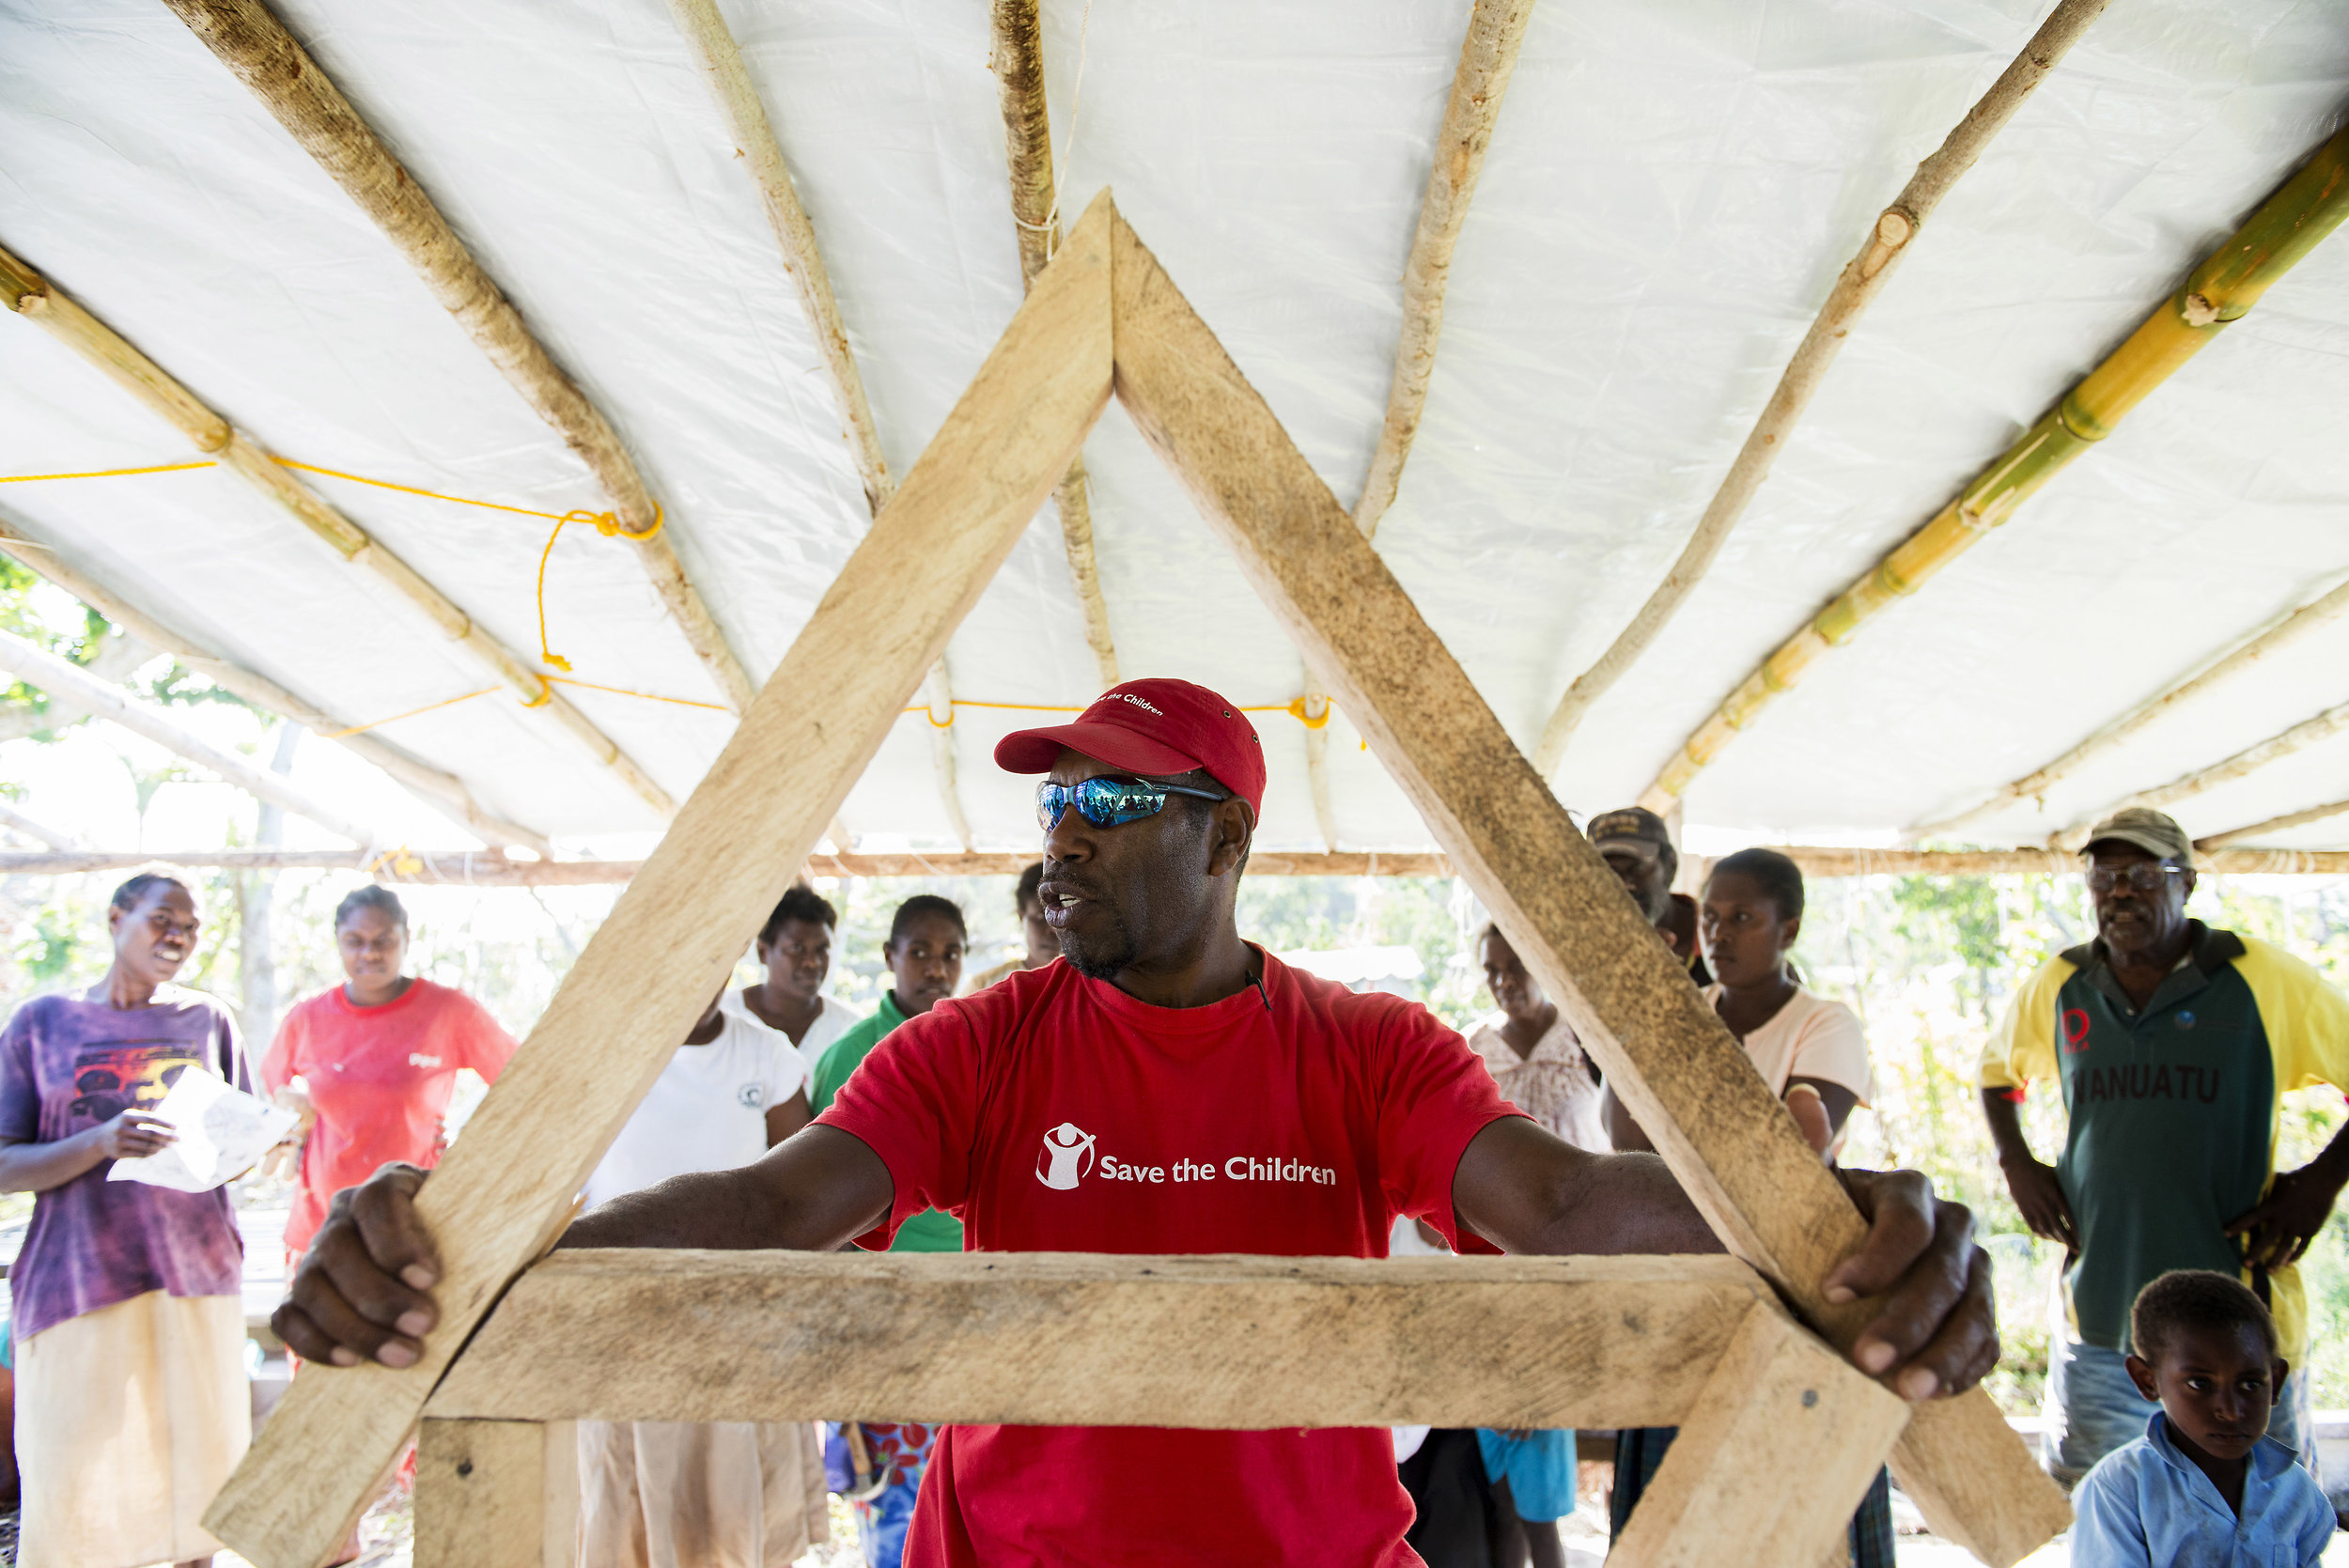  Shelter workshop, 3 months on from Cyclone Pam. Tongoa, Vanuatu. 2015. 